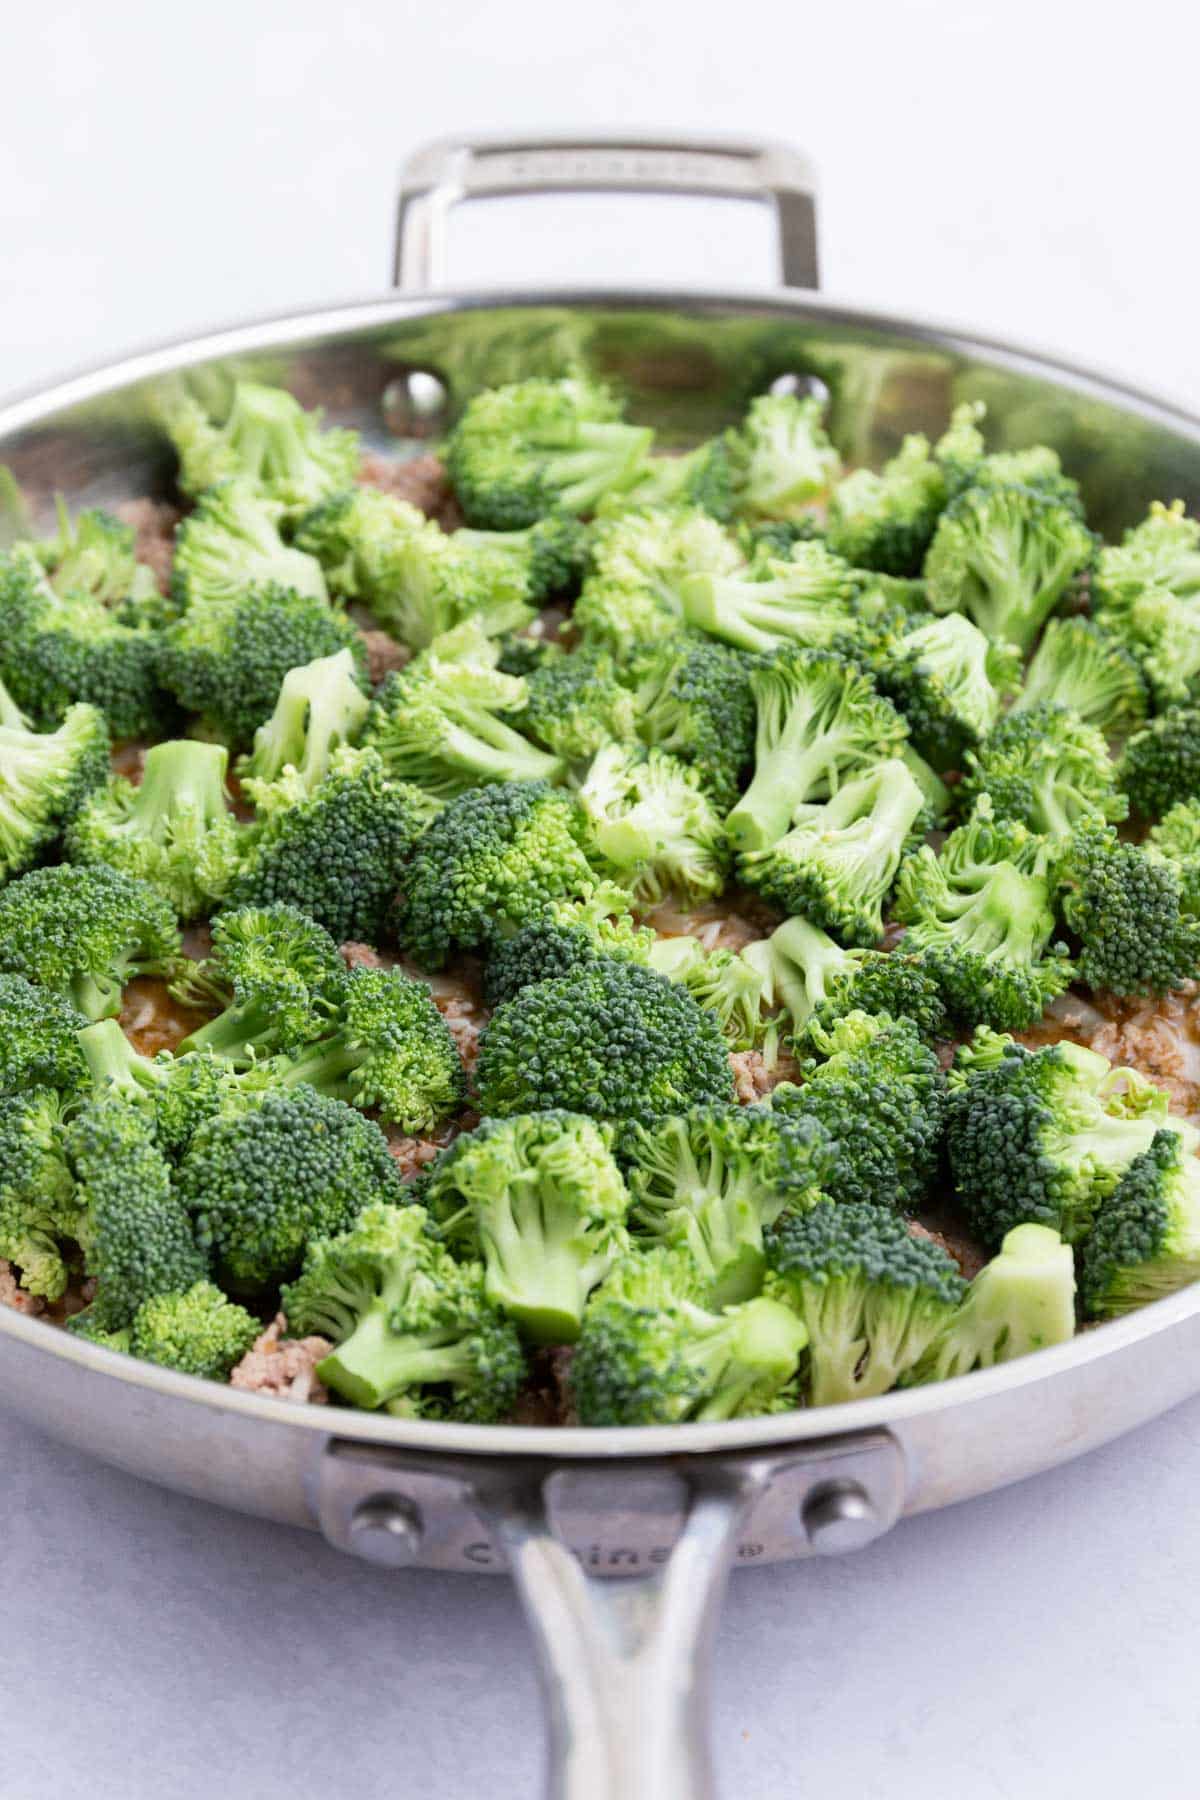 Broccoli is spread on top of the rice and turkey mixture.